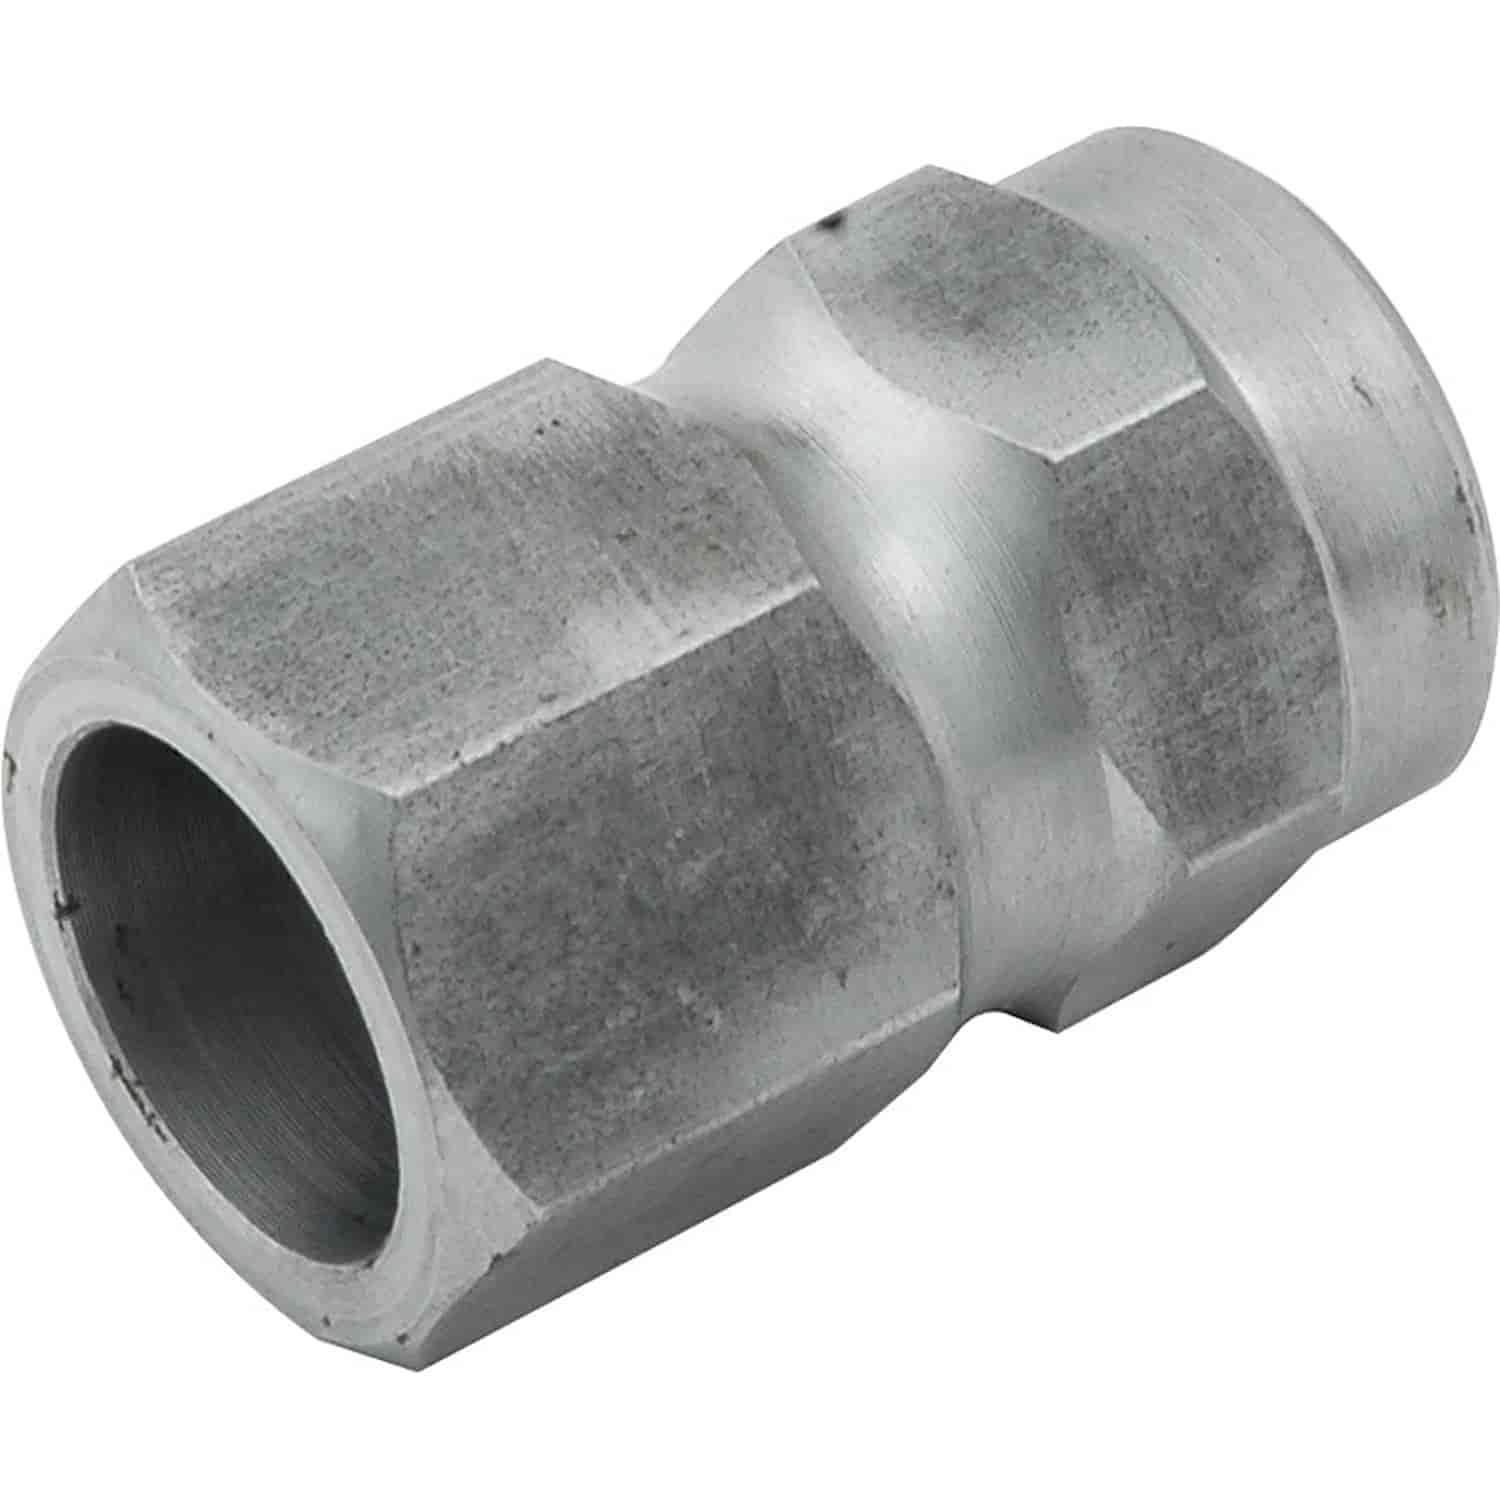 Replacement Hex Coupler For PN: 049-ALL52302